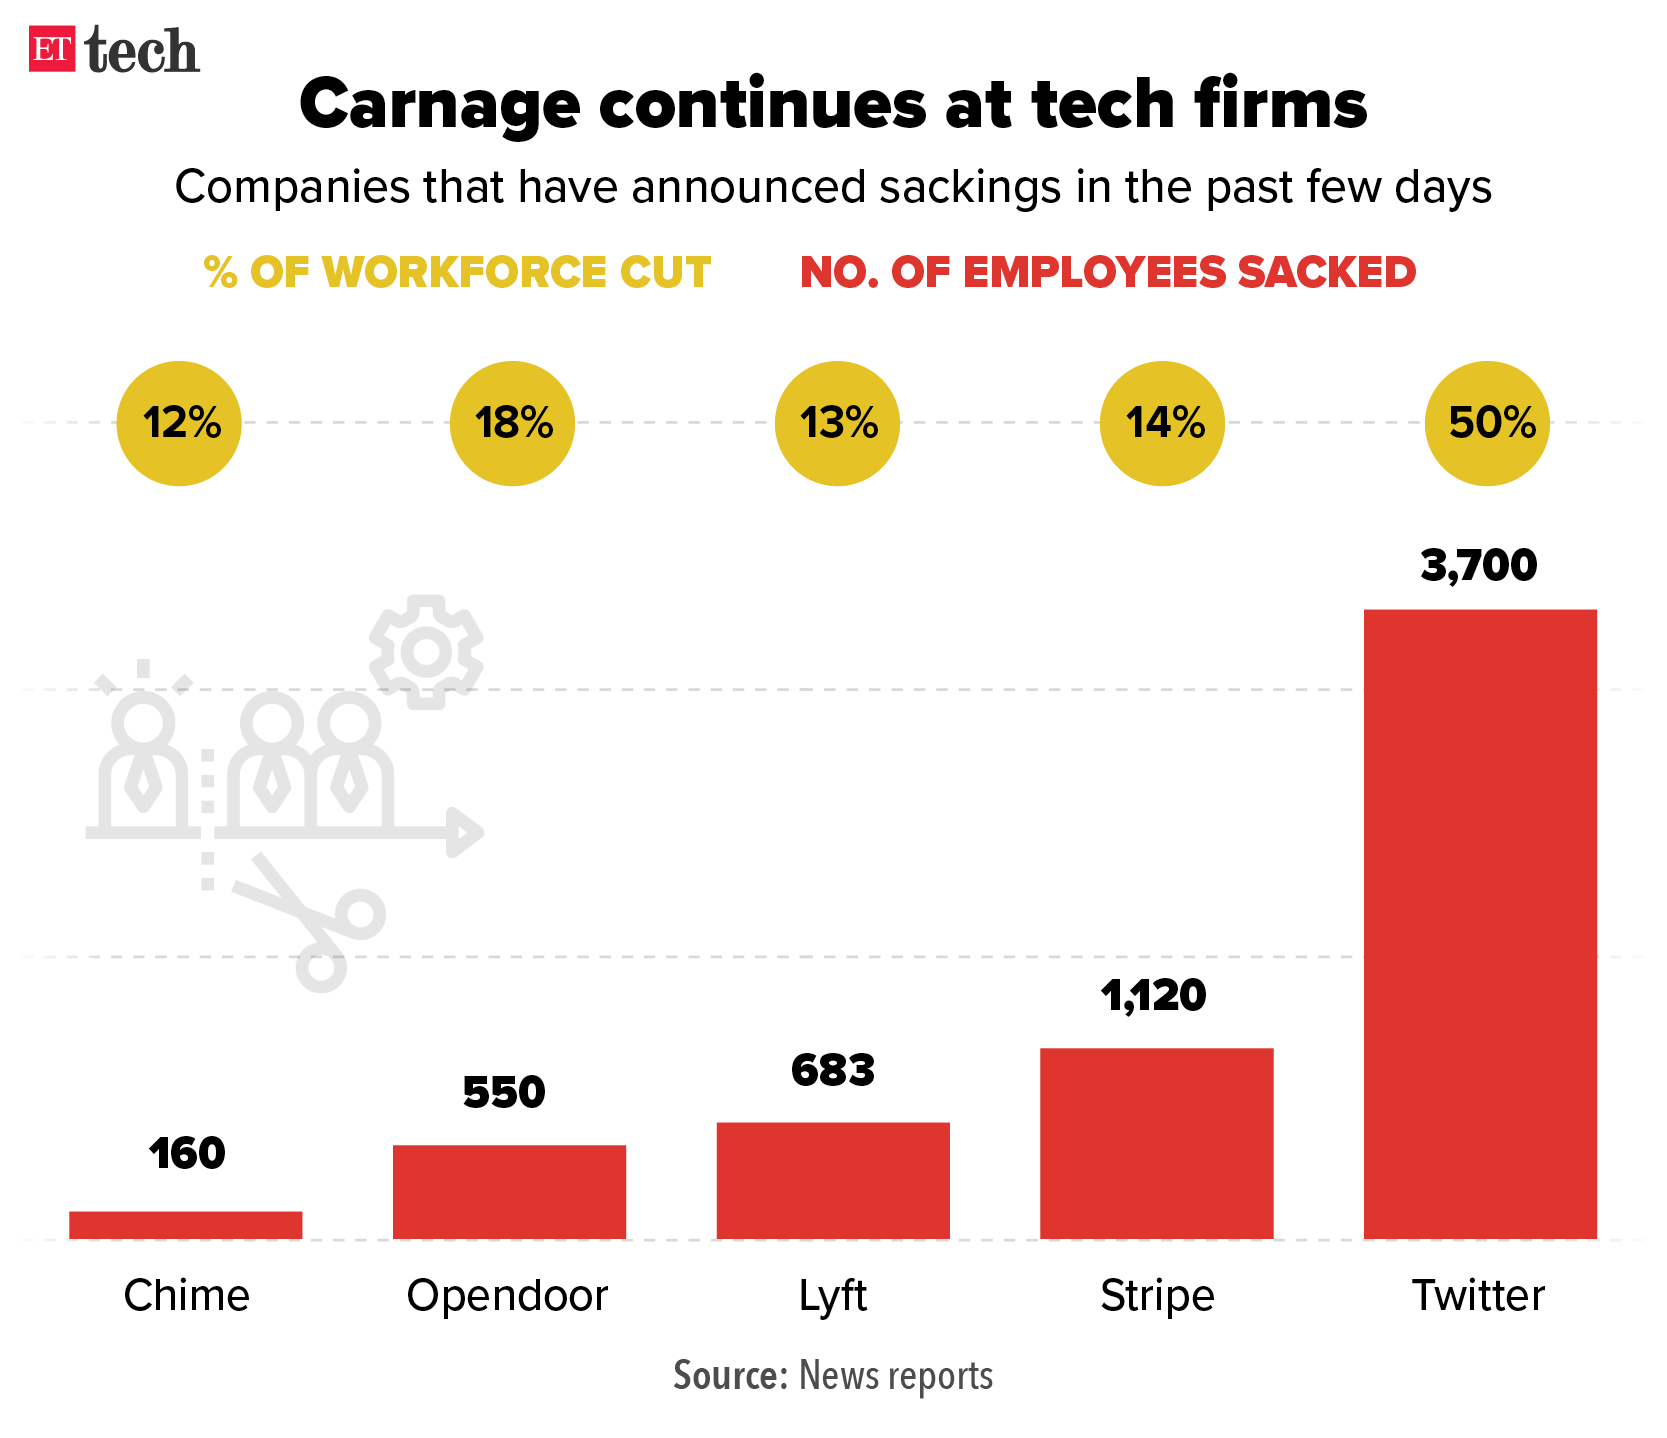 Carnage at tech firms